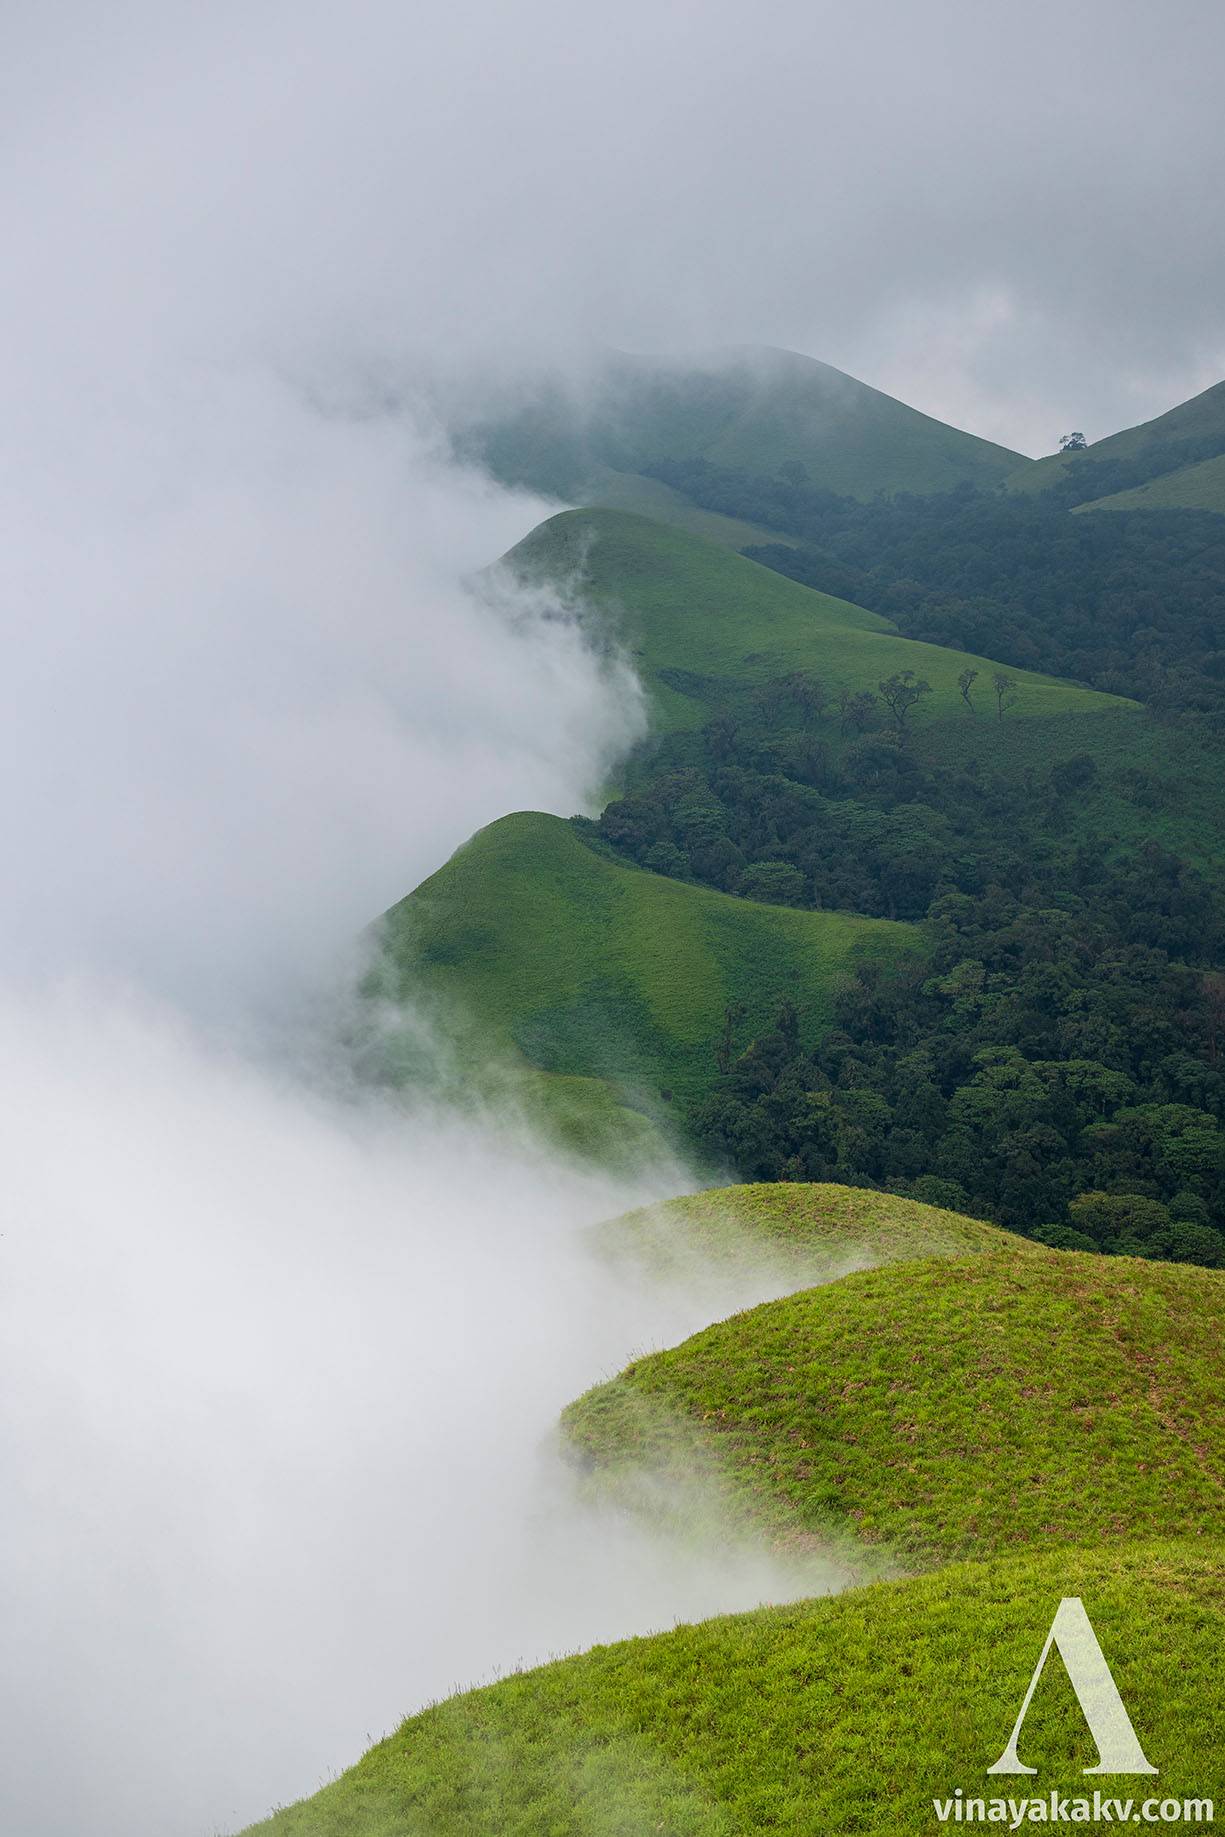 At the Edge of the Western Ghats